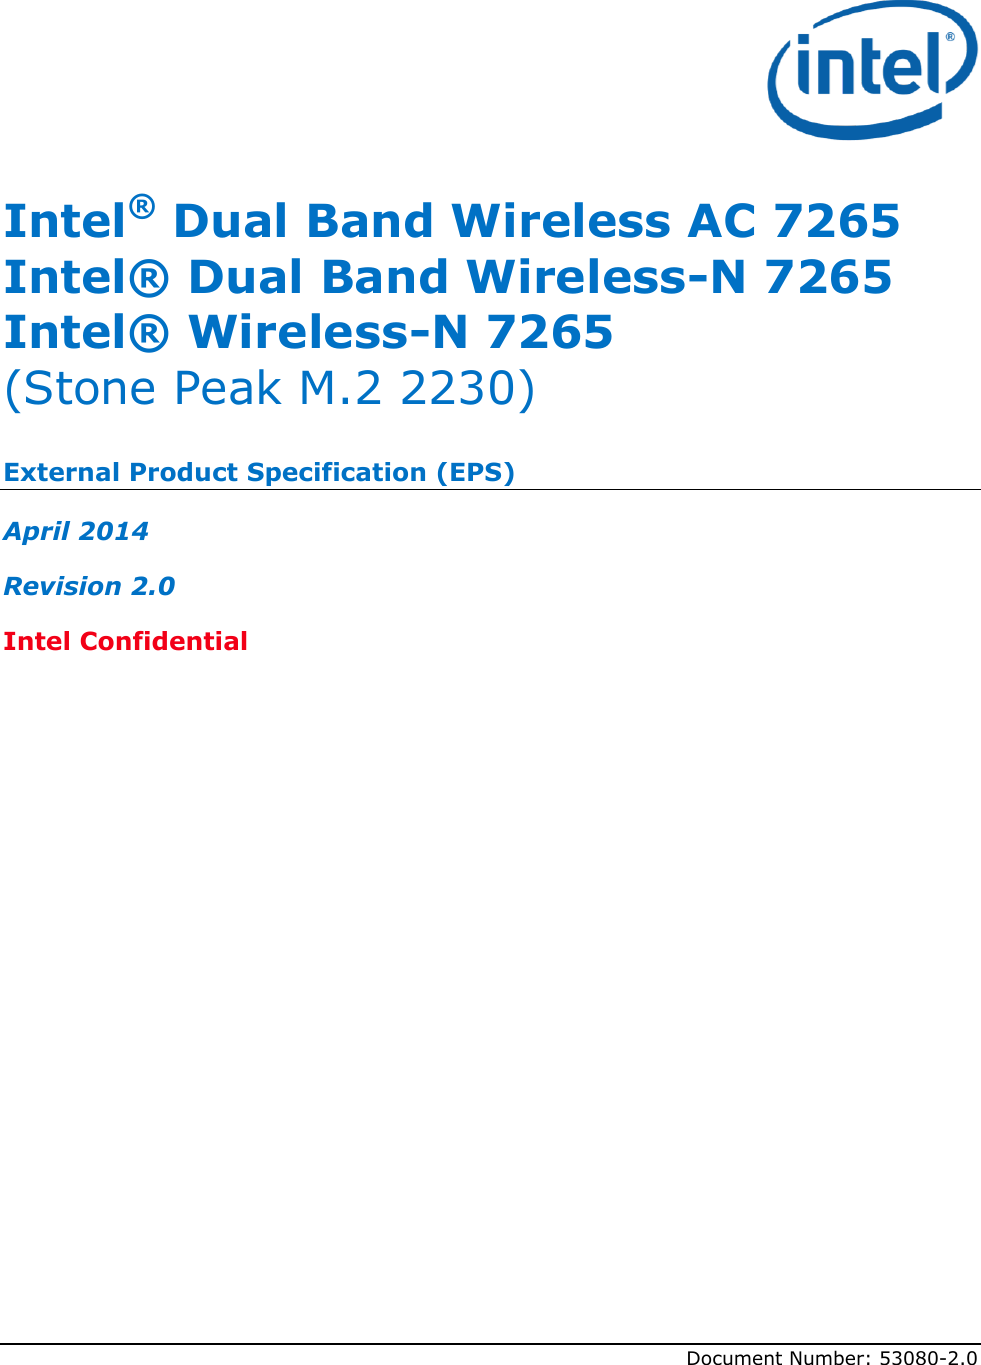        Document Number: 53080-2.0 Intel® Dual Band Wireless AC 7265 Intel® Dual Band Wireless-N 7265 Intel® Wireless-N 7265  (Stone Peak M.2 2230) External Product Specification (EPS) April 2014 Revision 2.0 Intel Confidential  